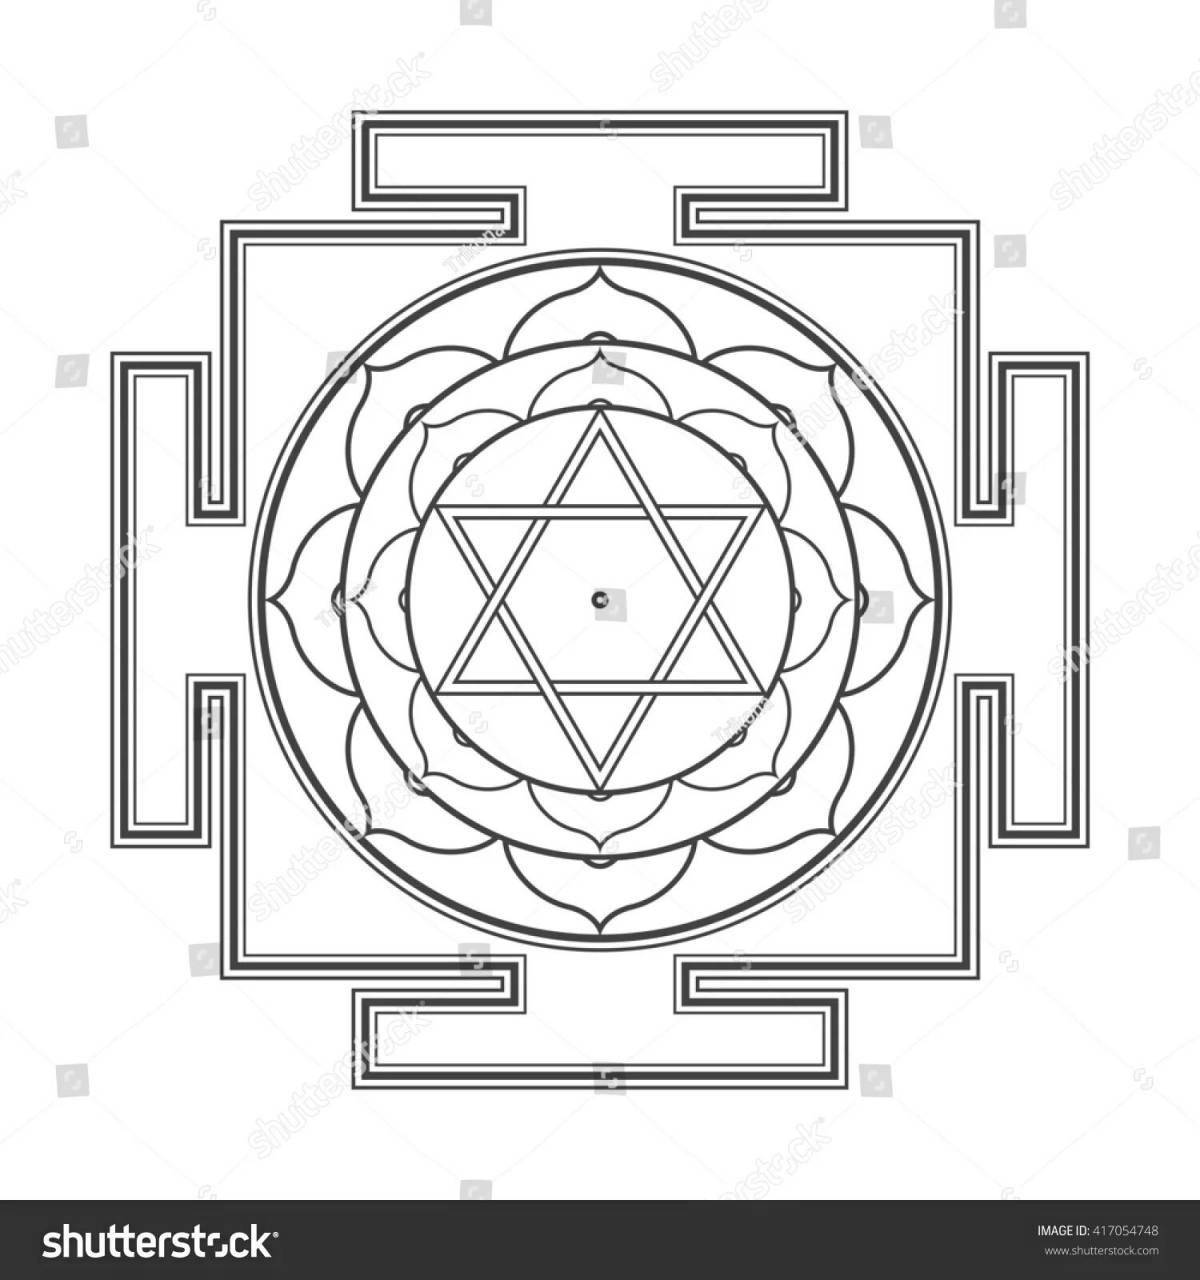 Colorful yantra coloring page